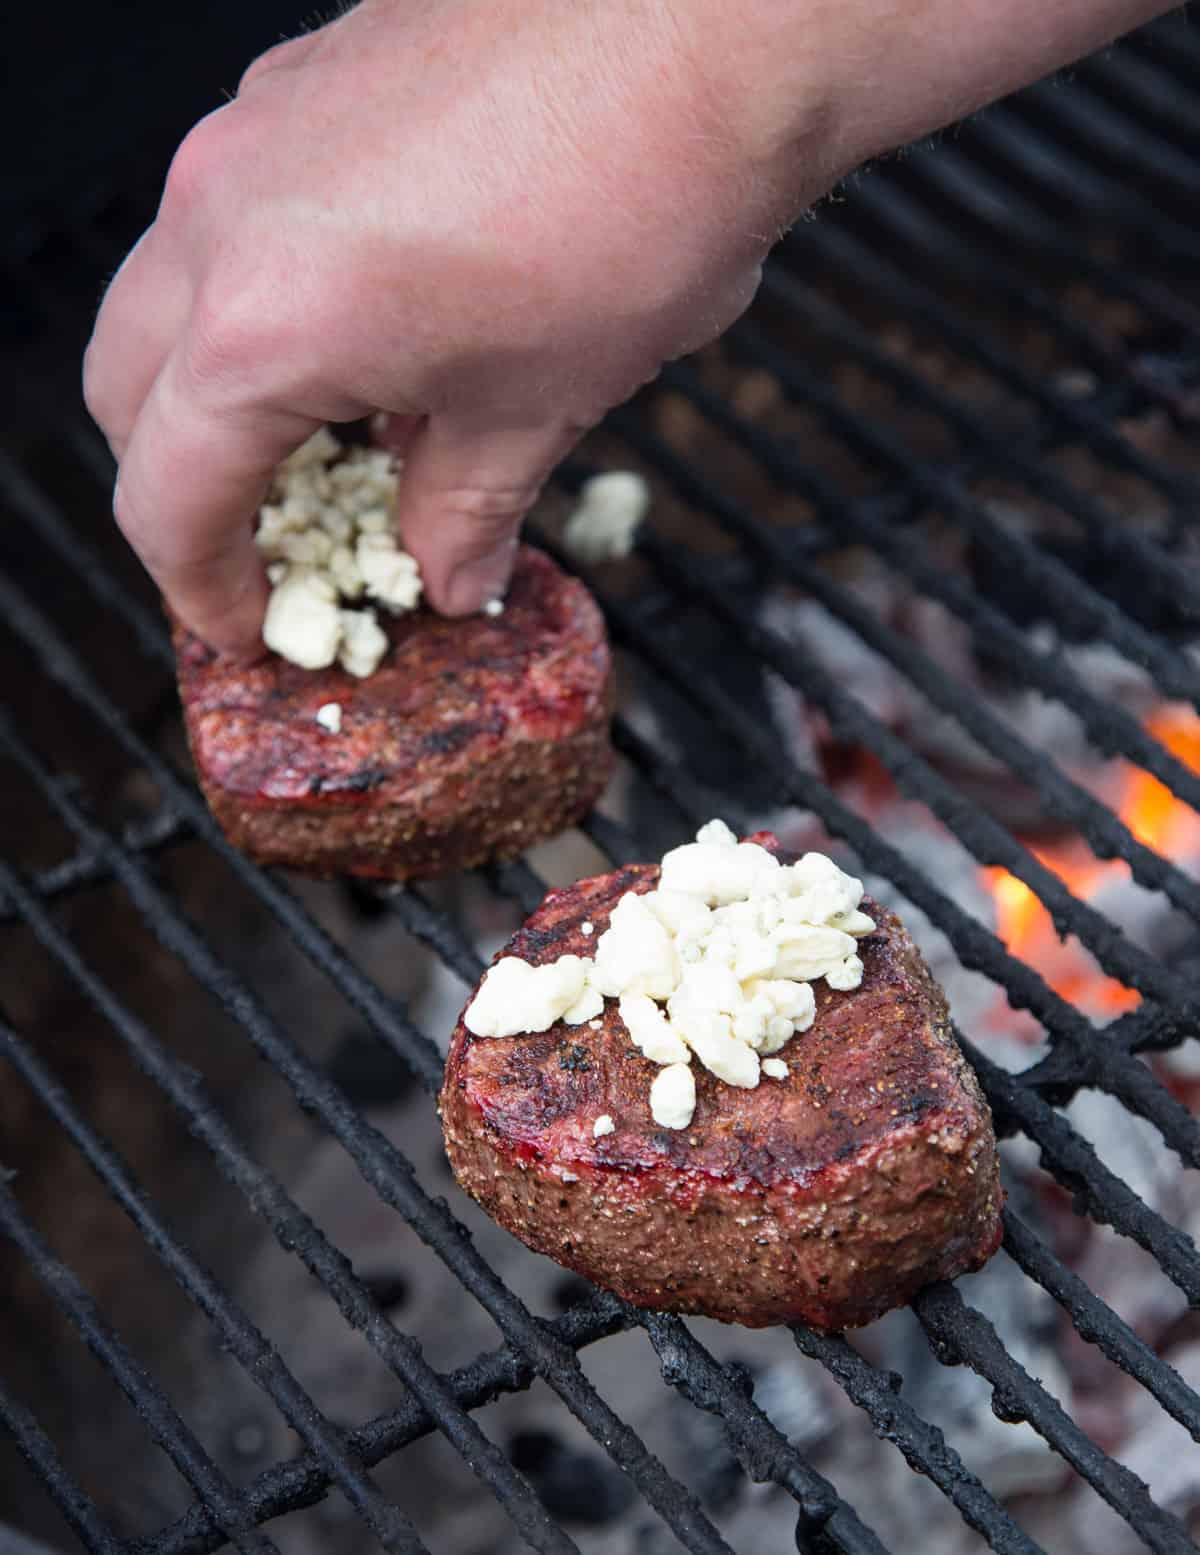 Grilling a Filet Mignon on the Grill and topping it with blue cheese